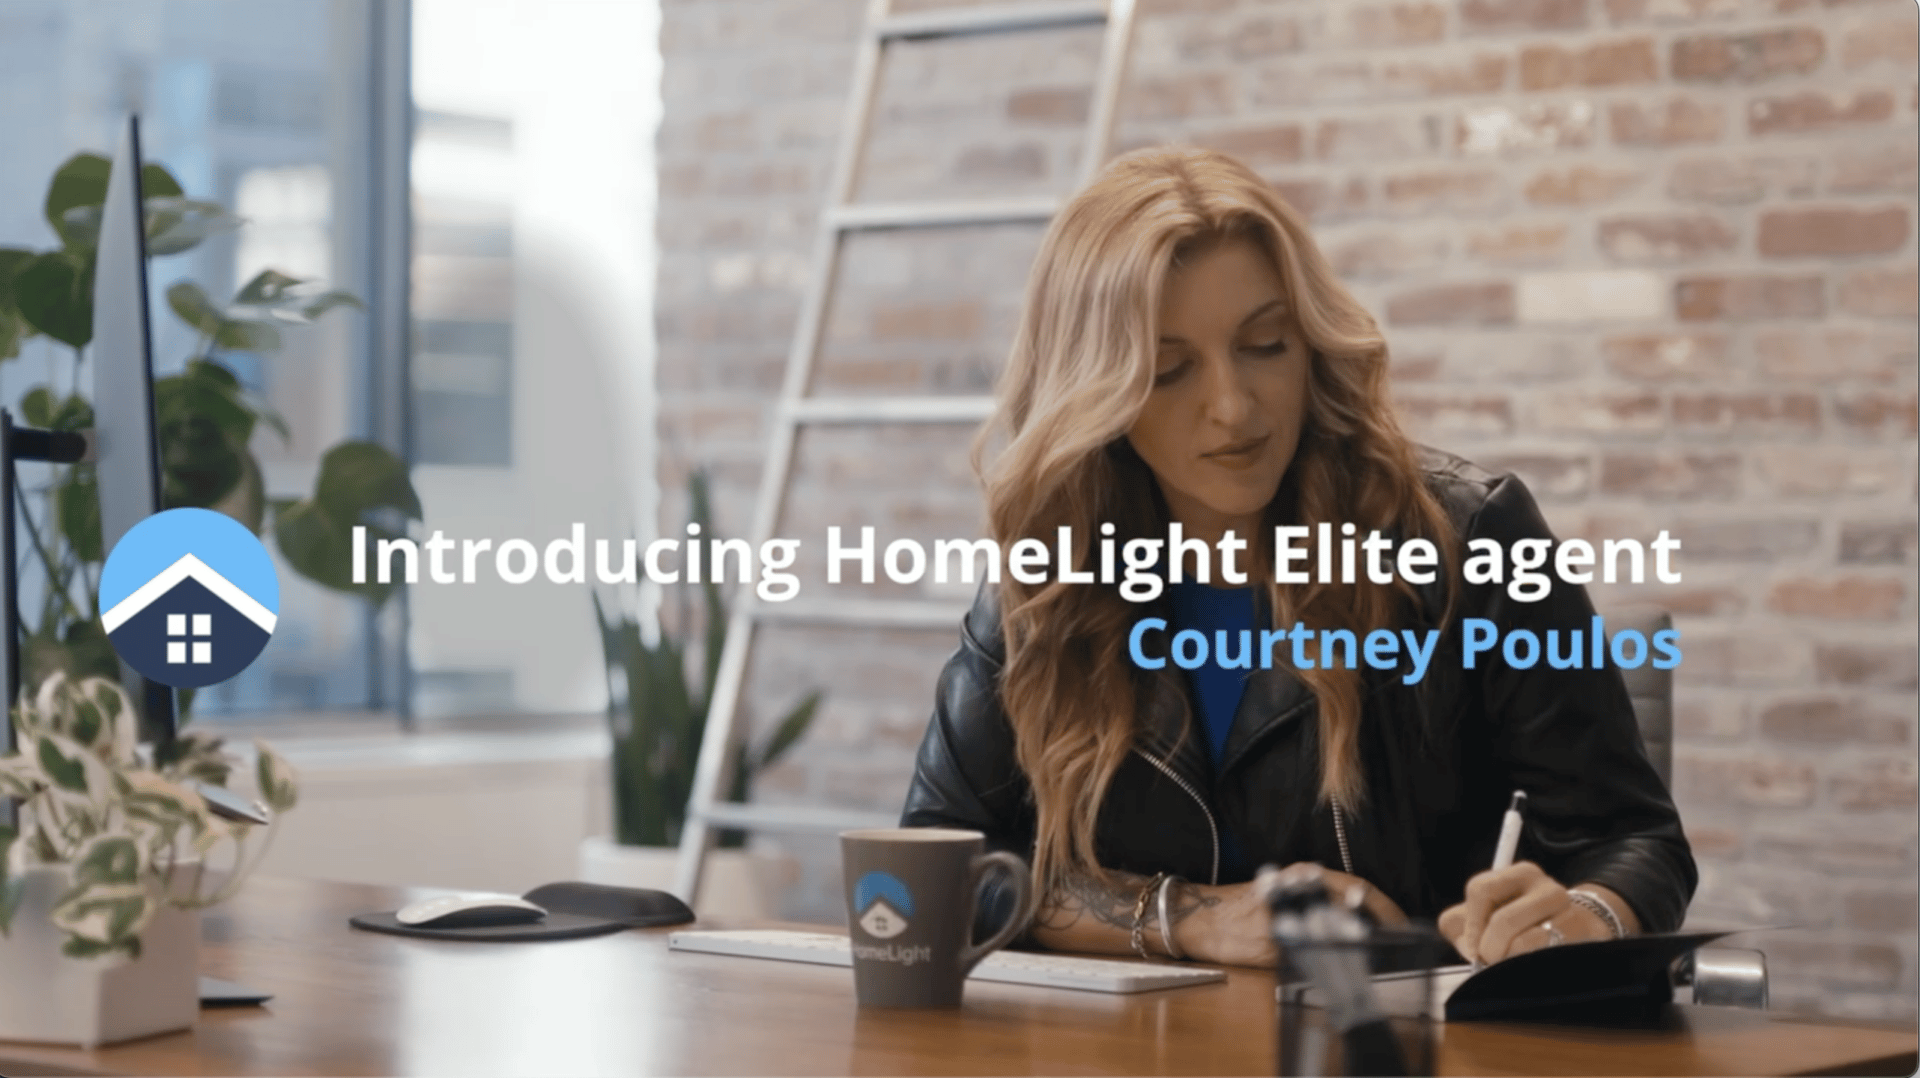 Introducing HomeLight Elite Agent Courtney Poulos